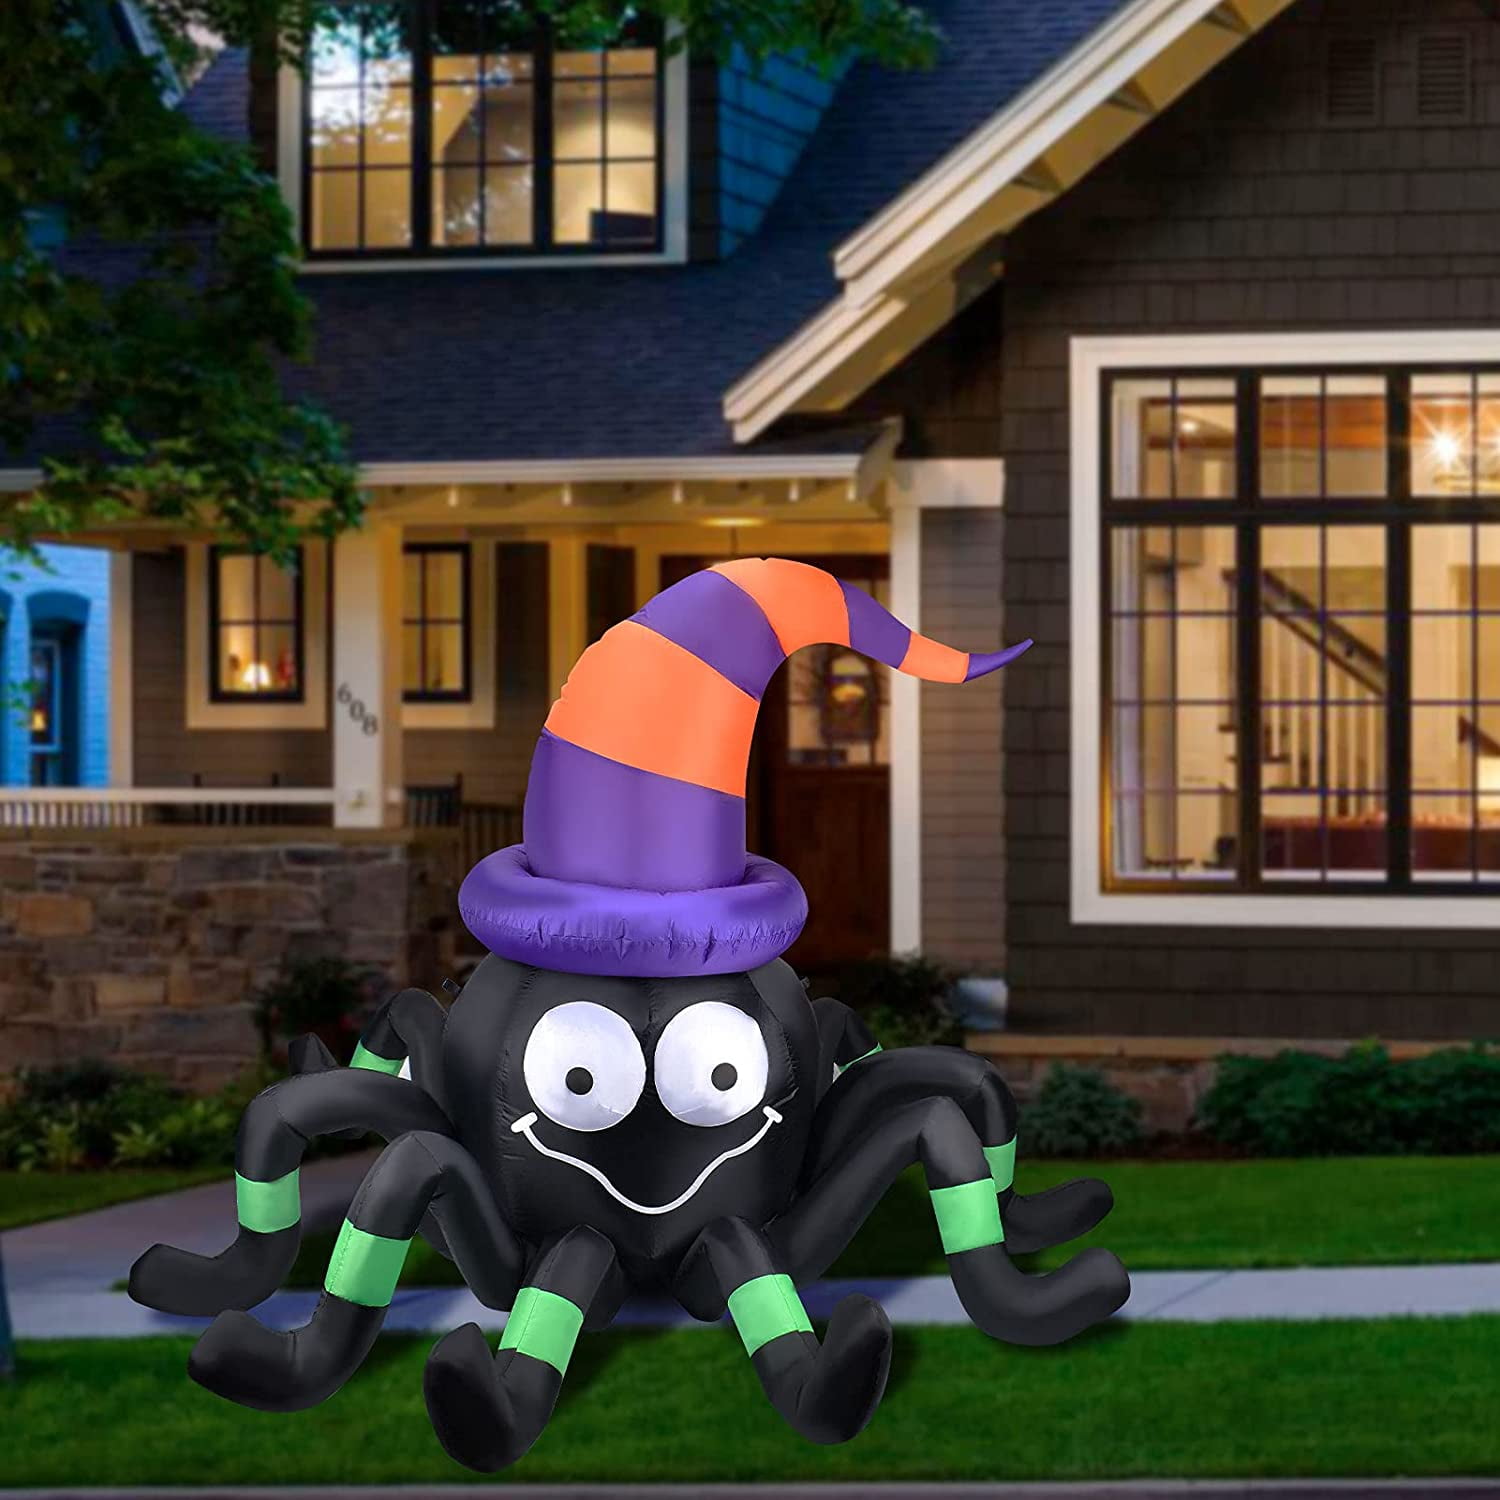 Auriviz 5FT Halloween Inflatables Spider Outdoor Blow Up Yard Decorations with Built-in LED Light,Halloween Decor for Home Party Holiday Lawn Garden Decor 